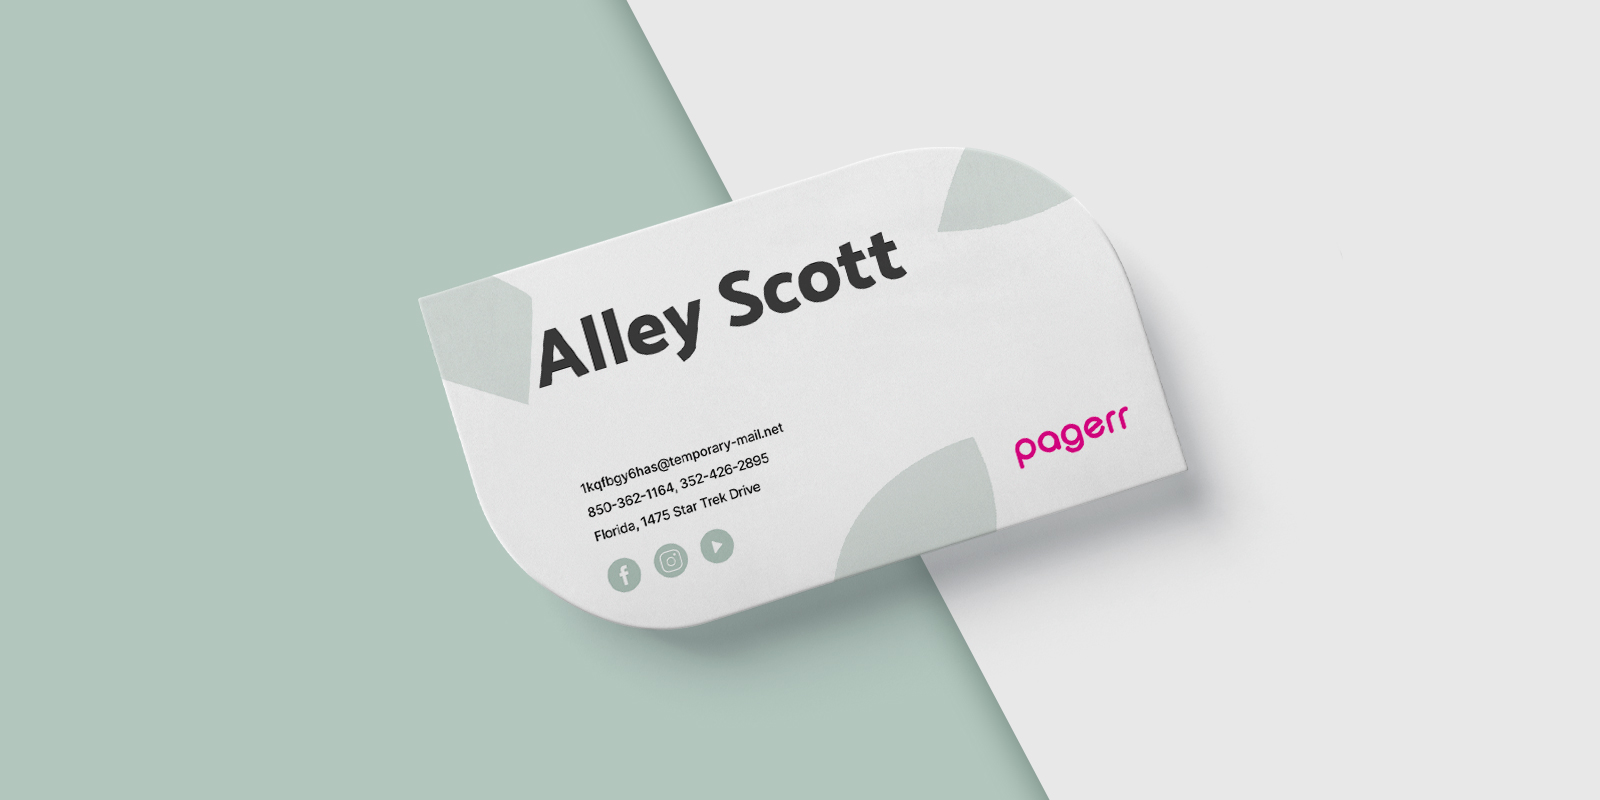 Special shape business cards in Cairns - Print with Pagerr